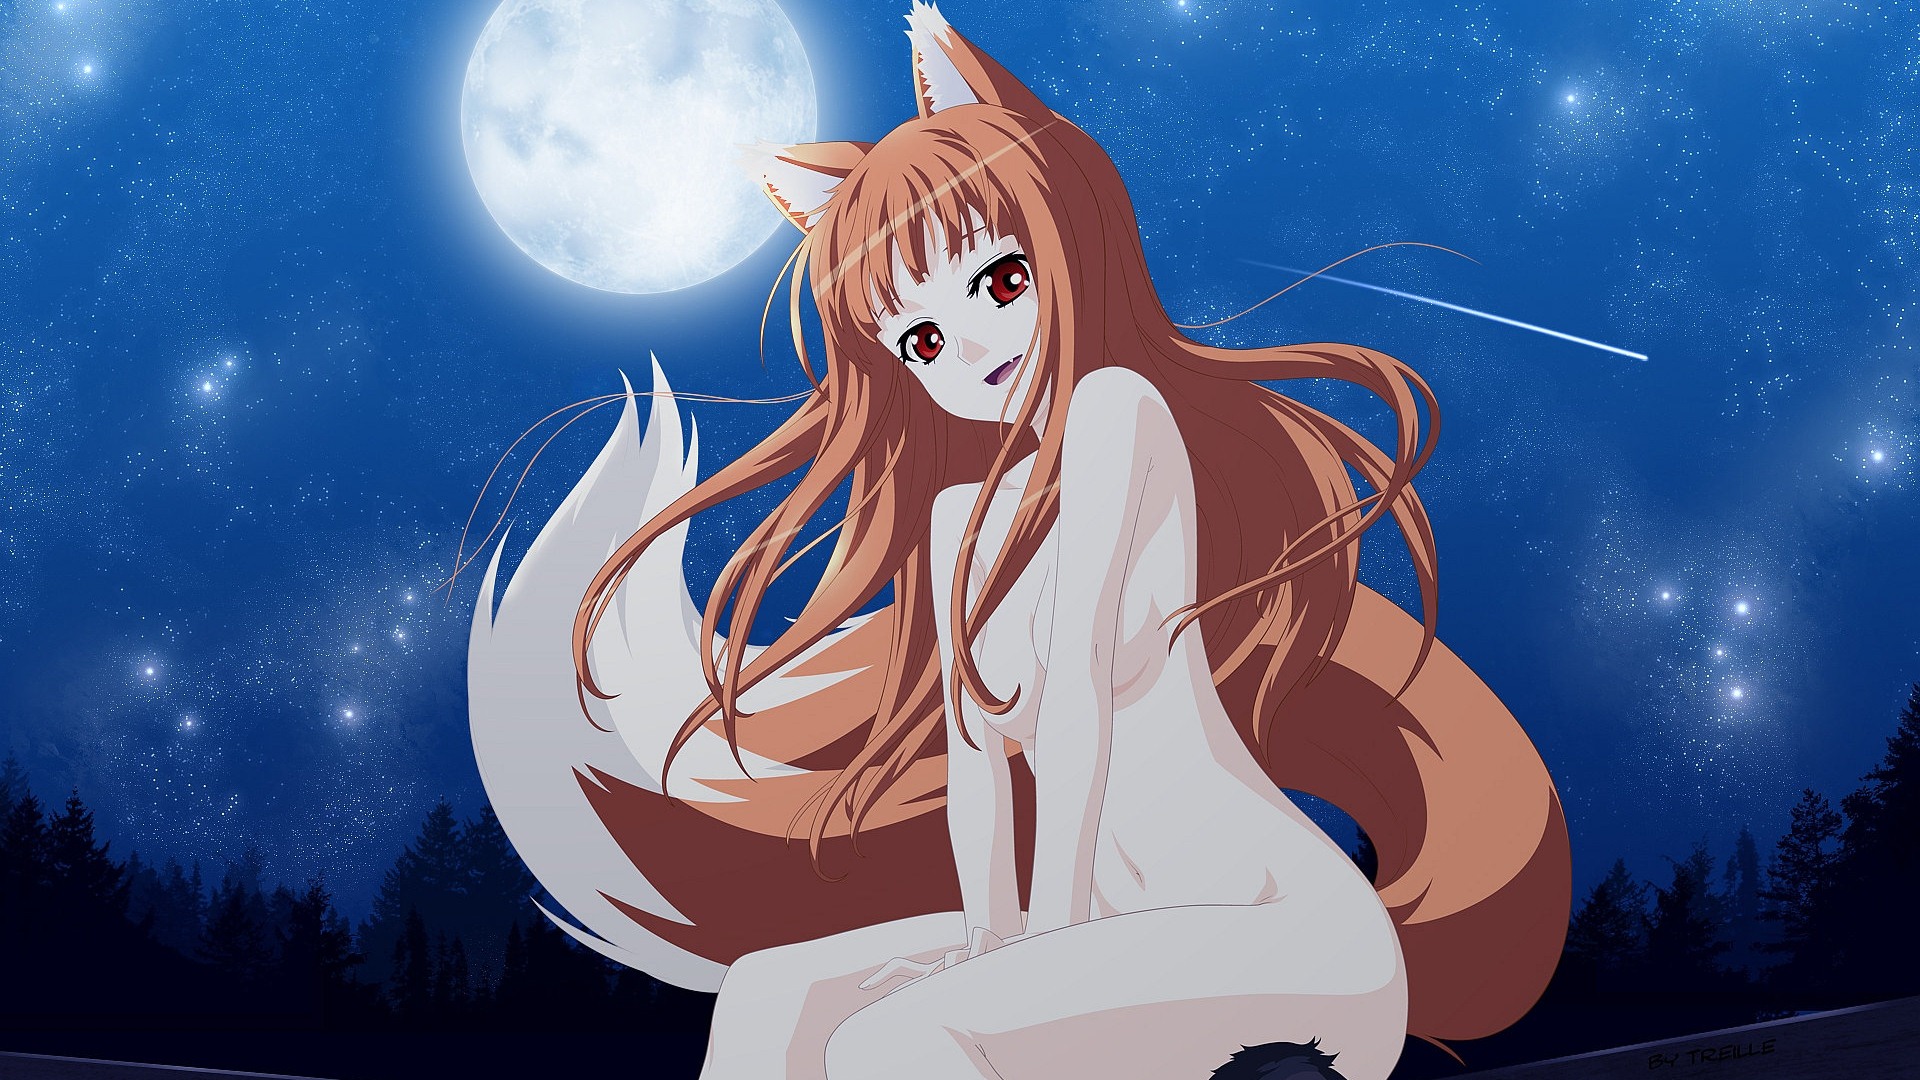 Spice and Wolf HD wallpapers #7 - 1920x1080